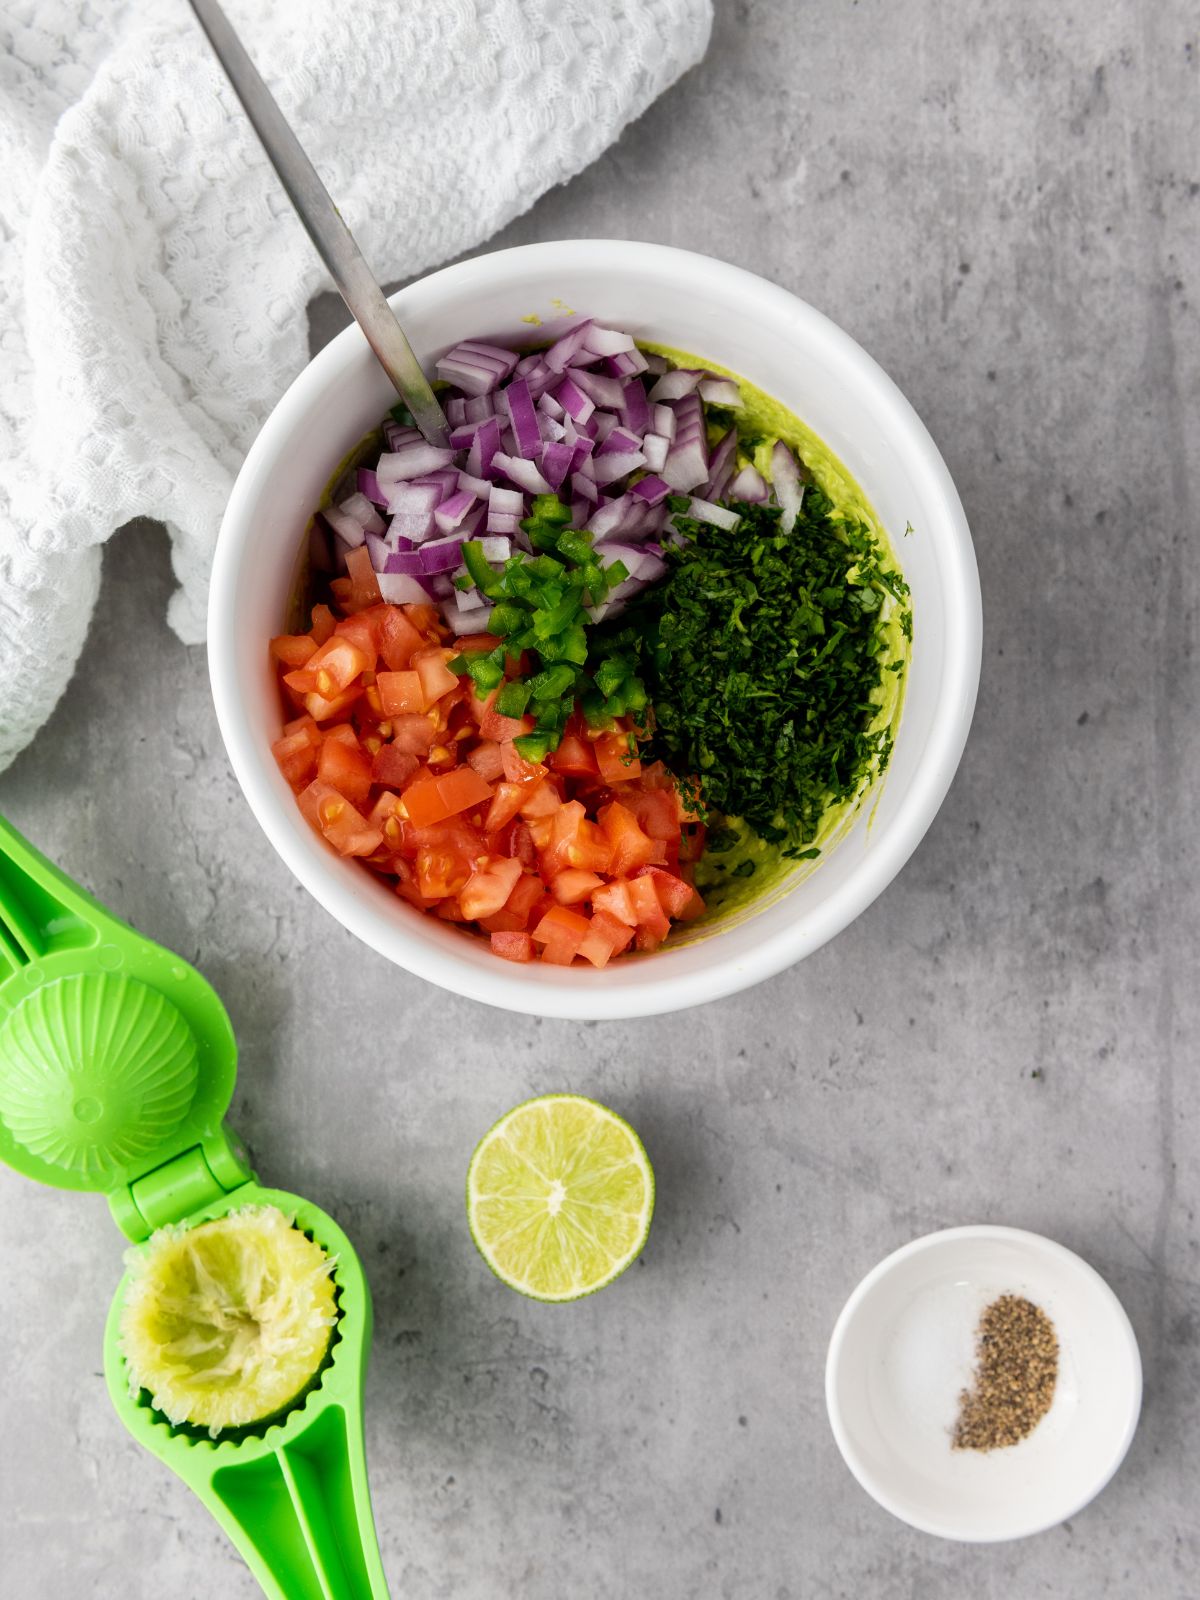 Adding the diced tomatoes, diced onion, chopped jalapeno, chopped cilantro, juice of the lime and season with salt and pepper to the mashed avocado.